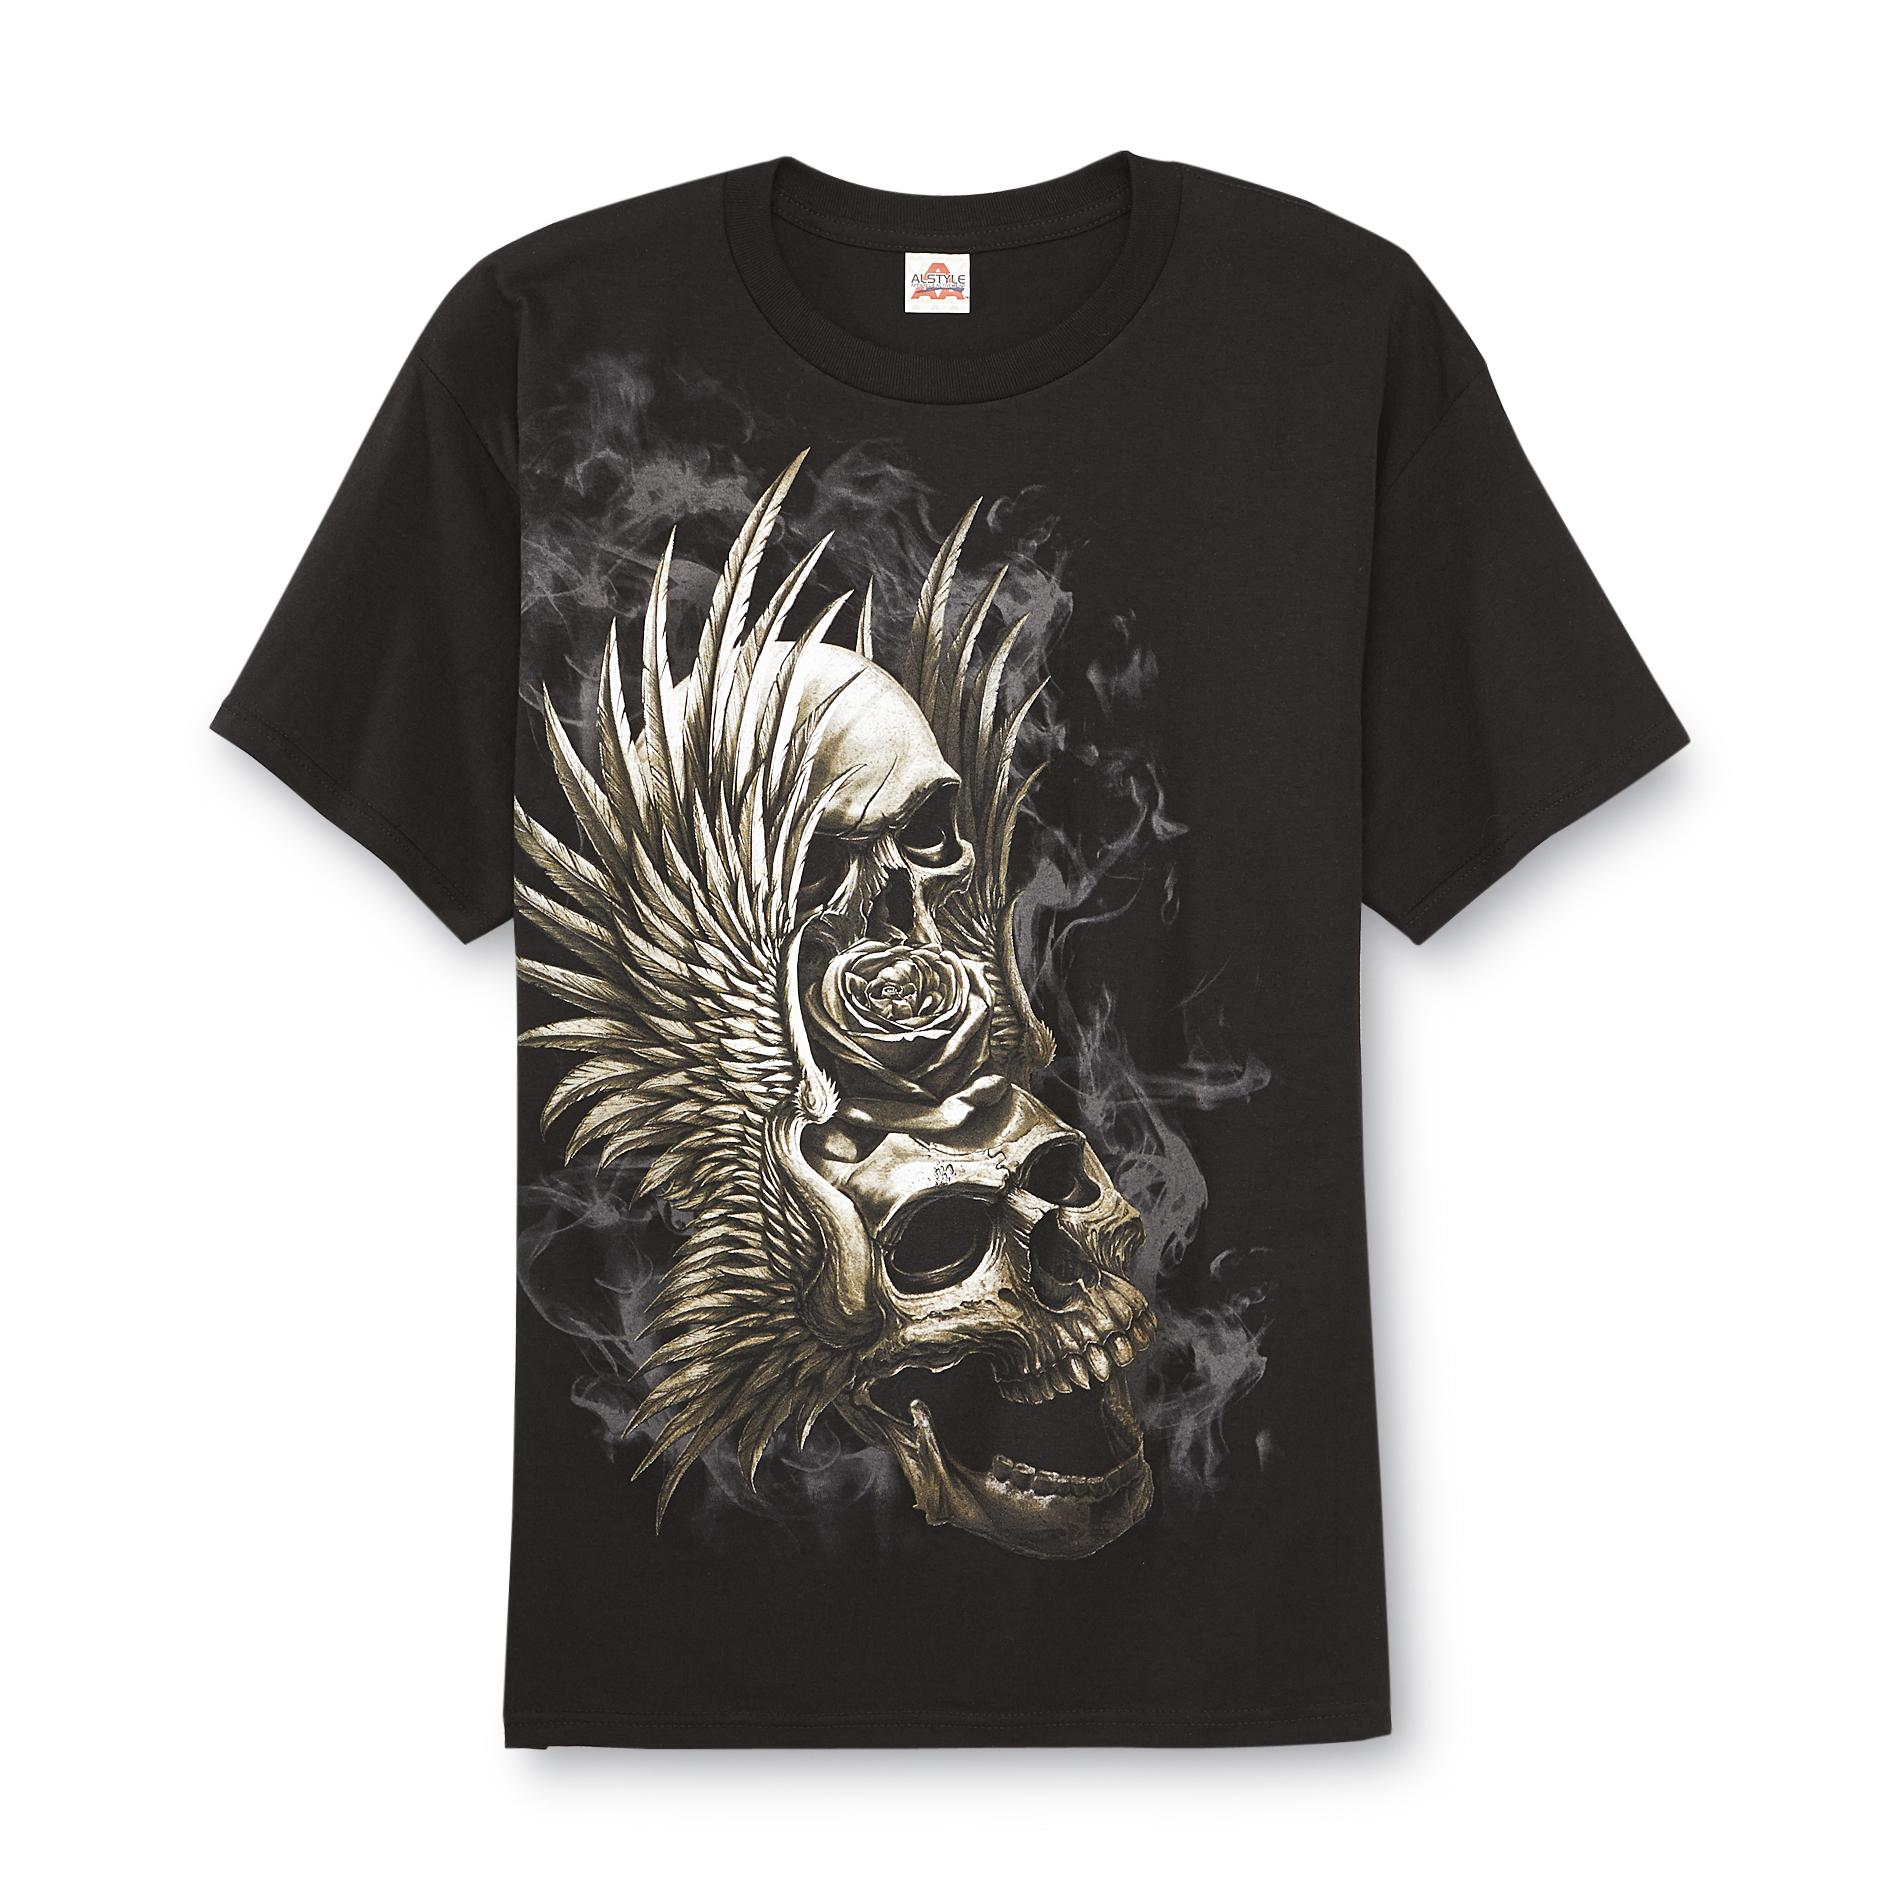 Young Men's Graphic T-Shirt - Winged Skulls